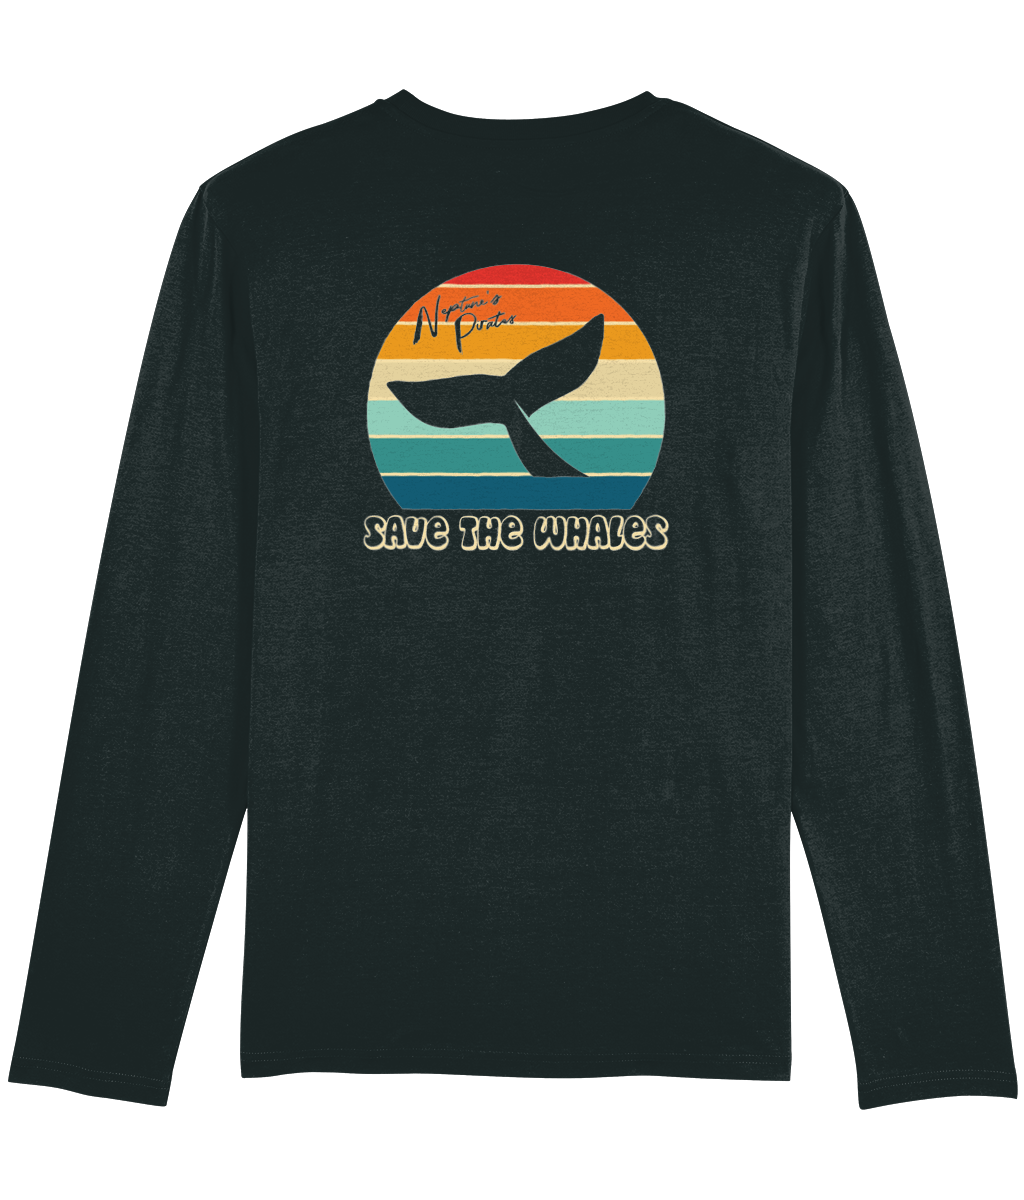 Retro 'Save The Whales' Unisex Long Sleeve T-Shirt - Captain Paul Watson Foundation (t/a Neptune's Pirates)